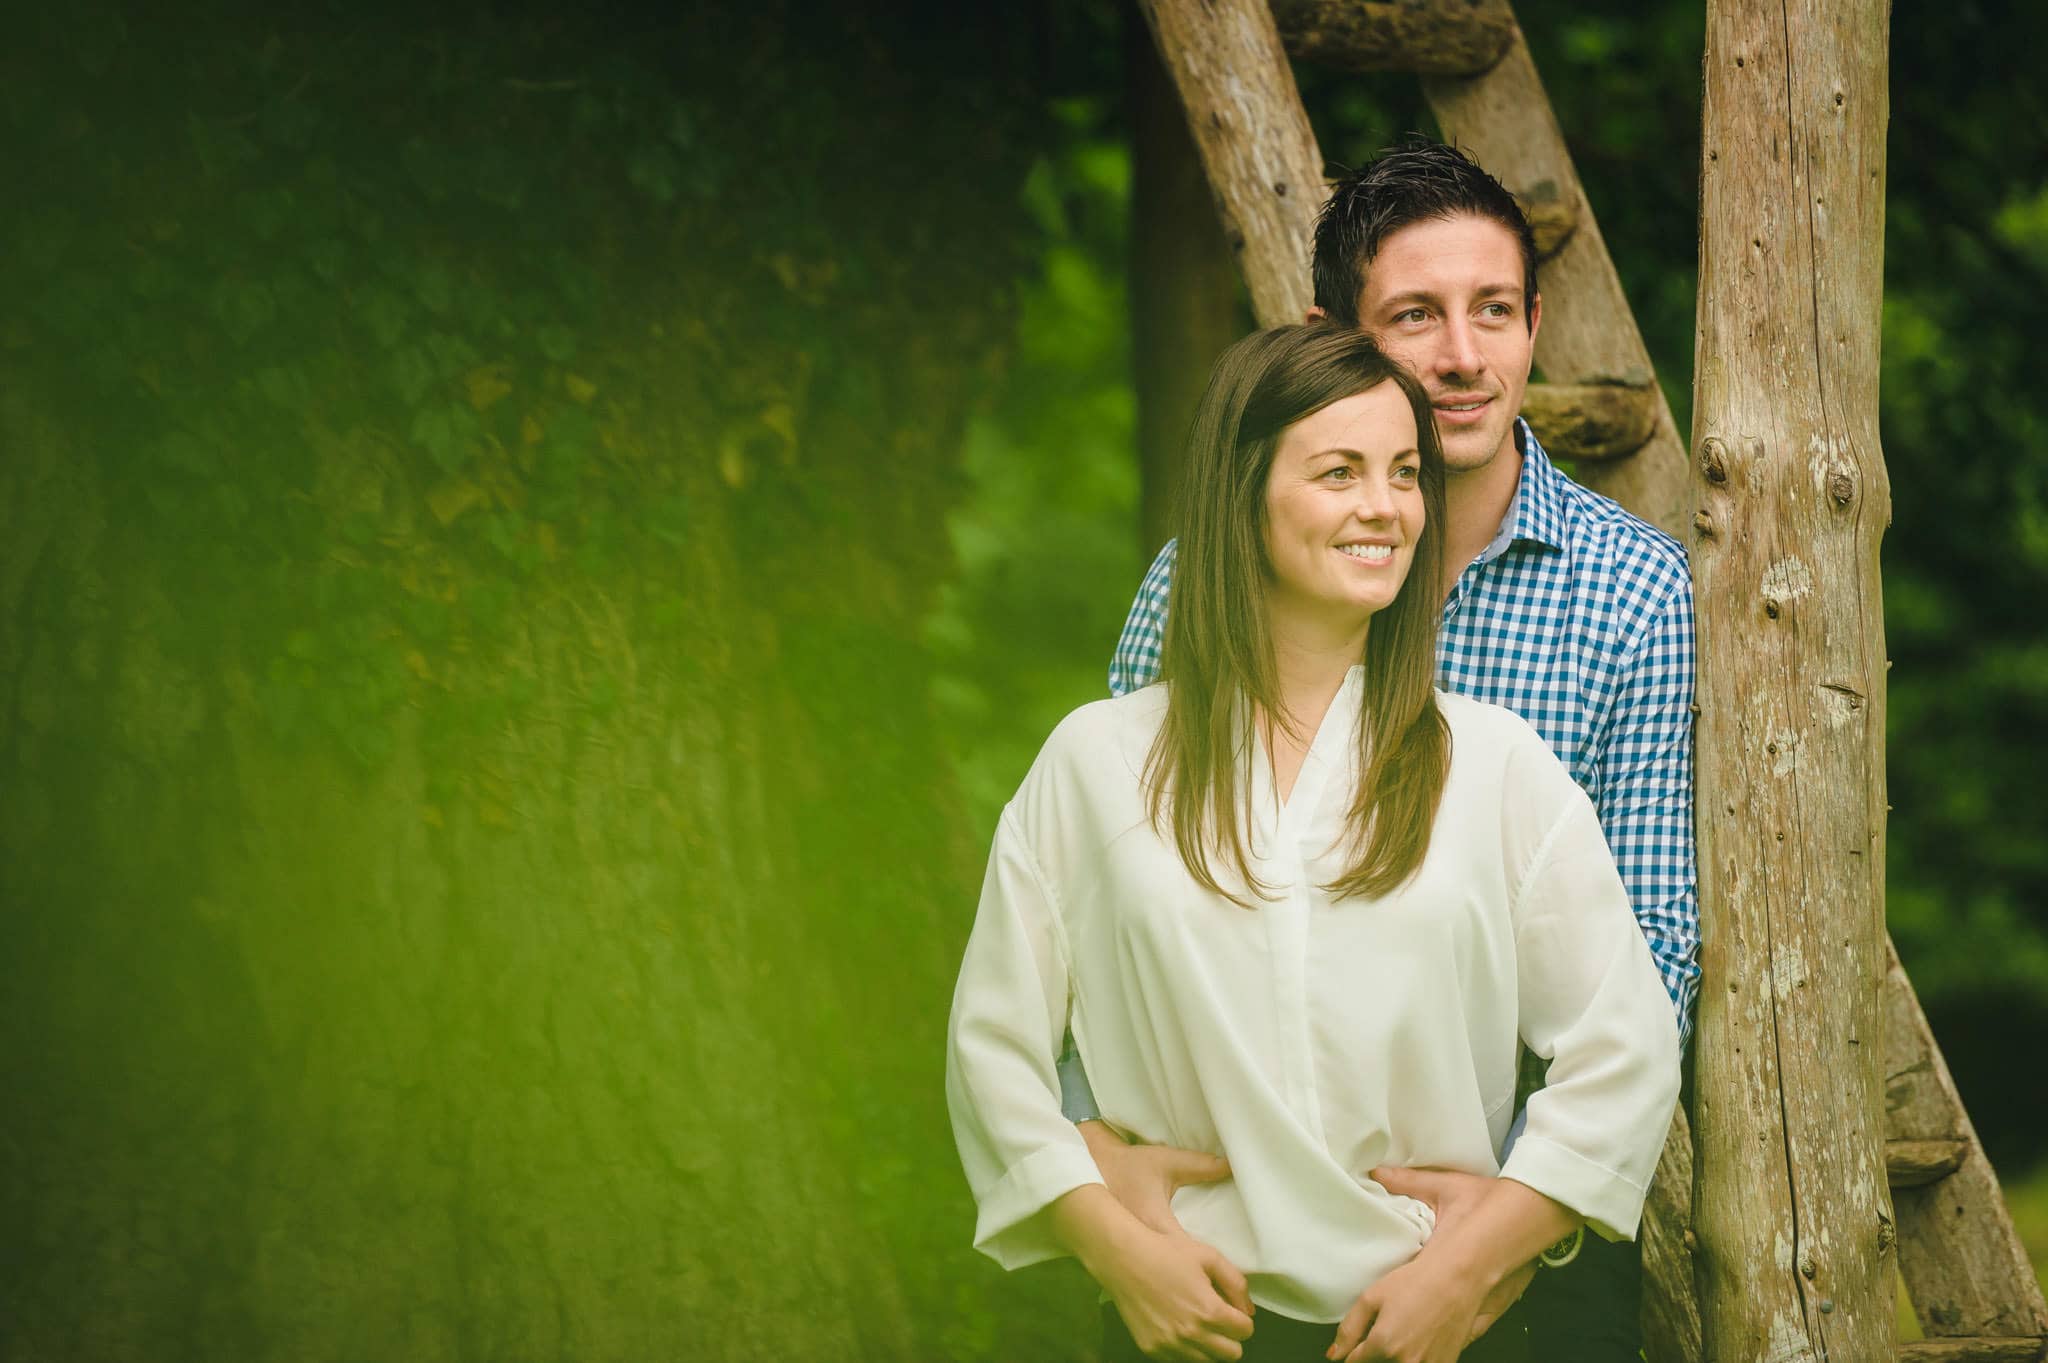 Dean + Sarah's pre wedding photography session in Herefordshire, West Midlands 13